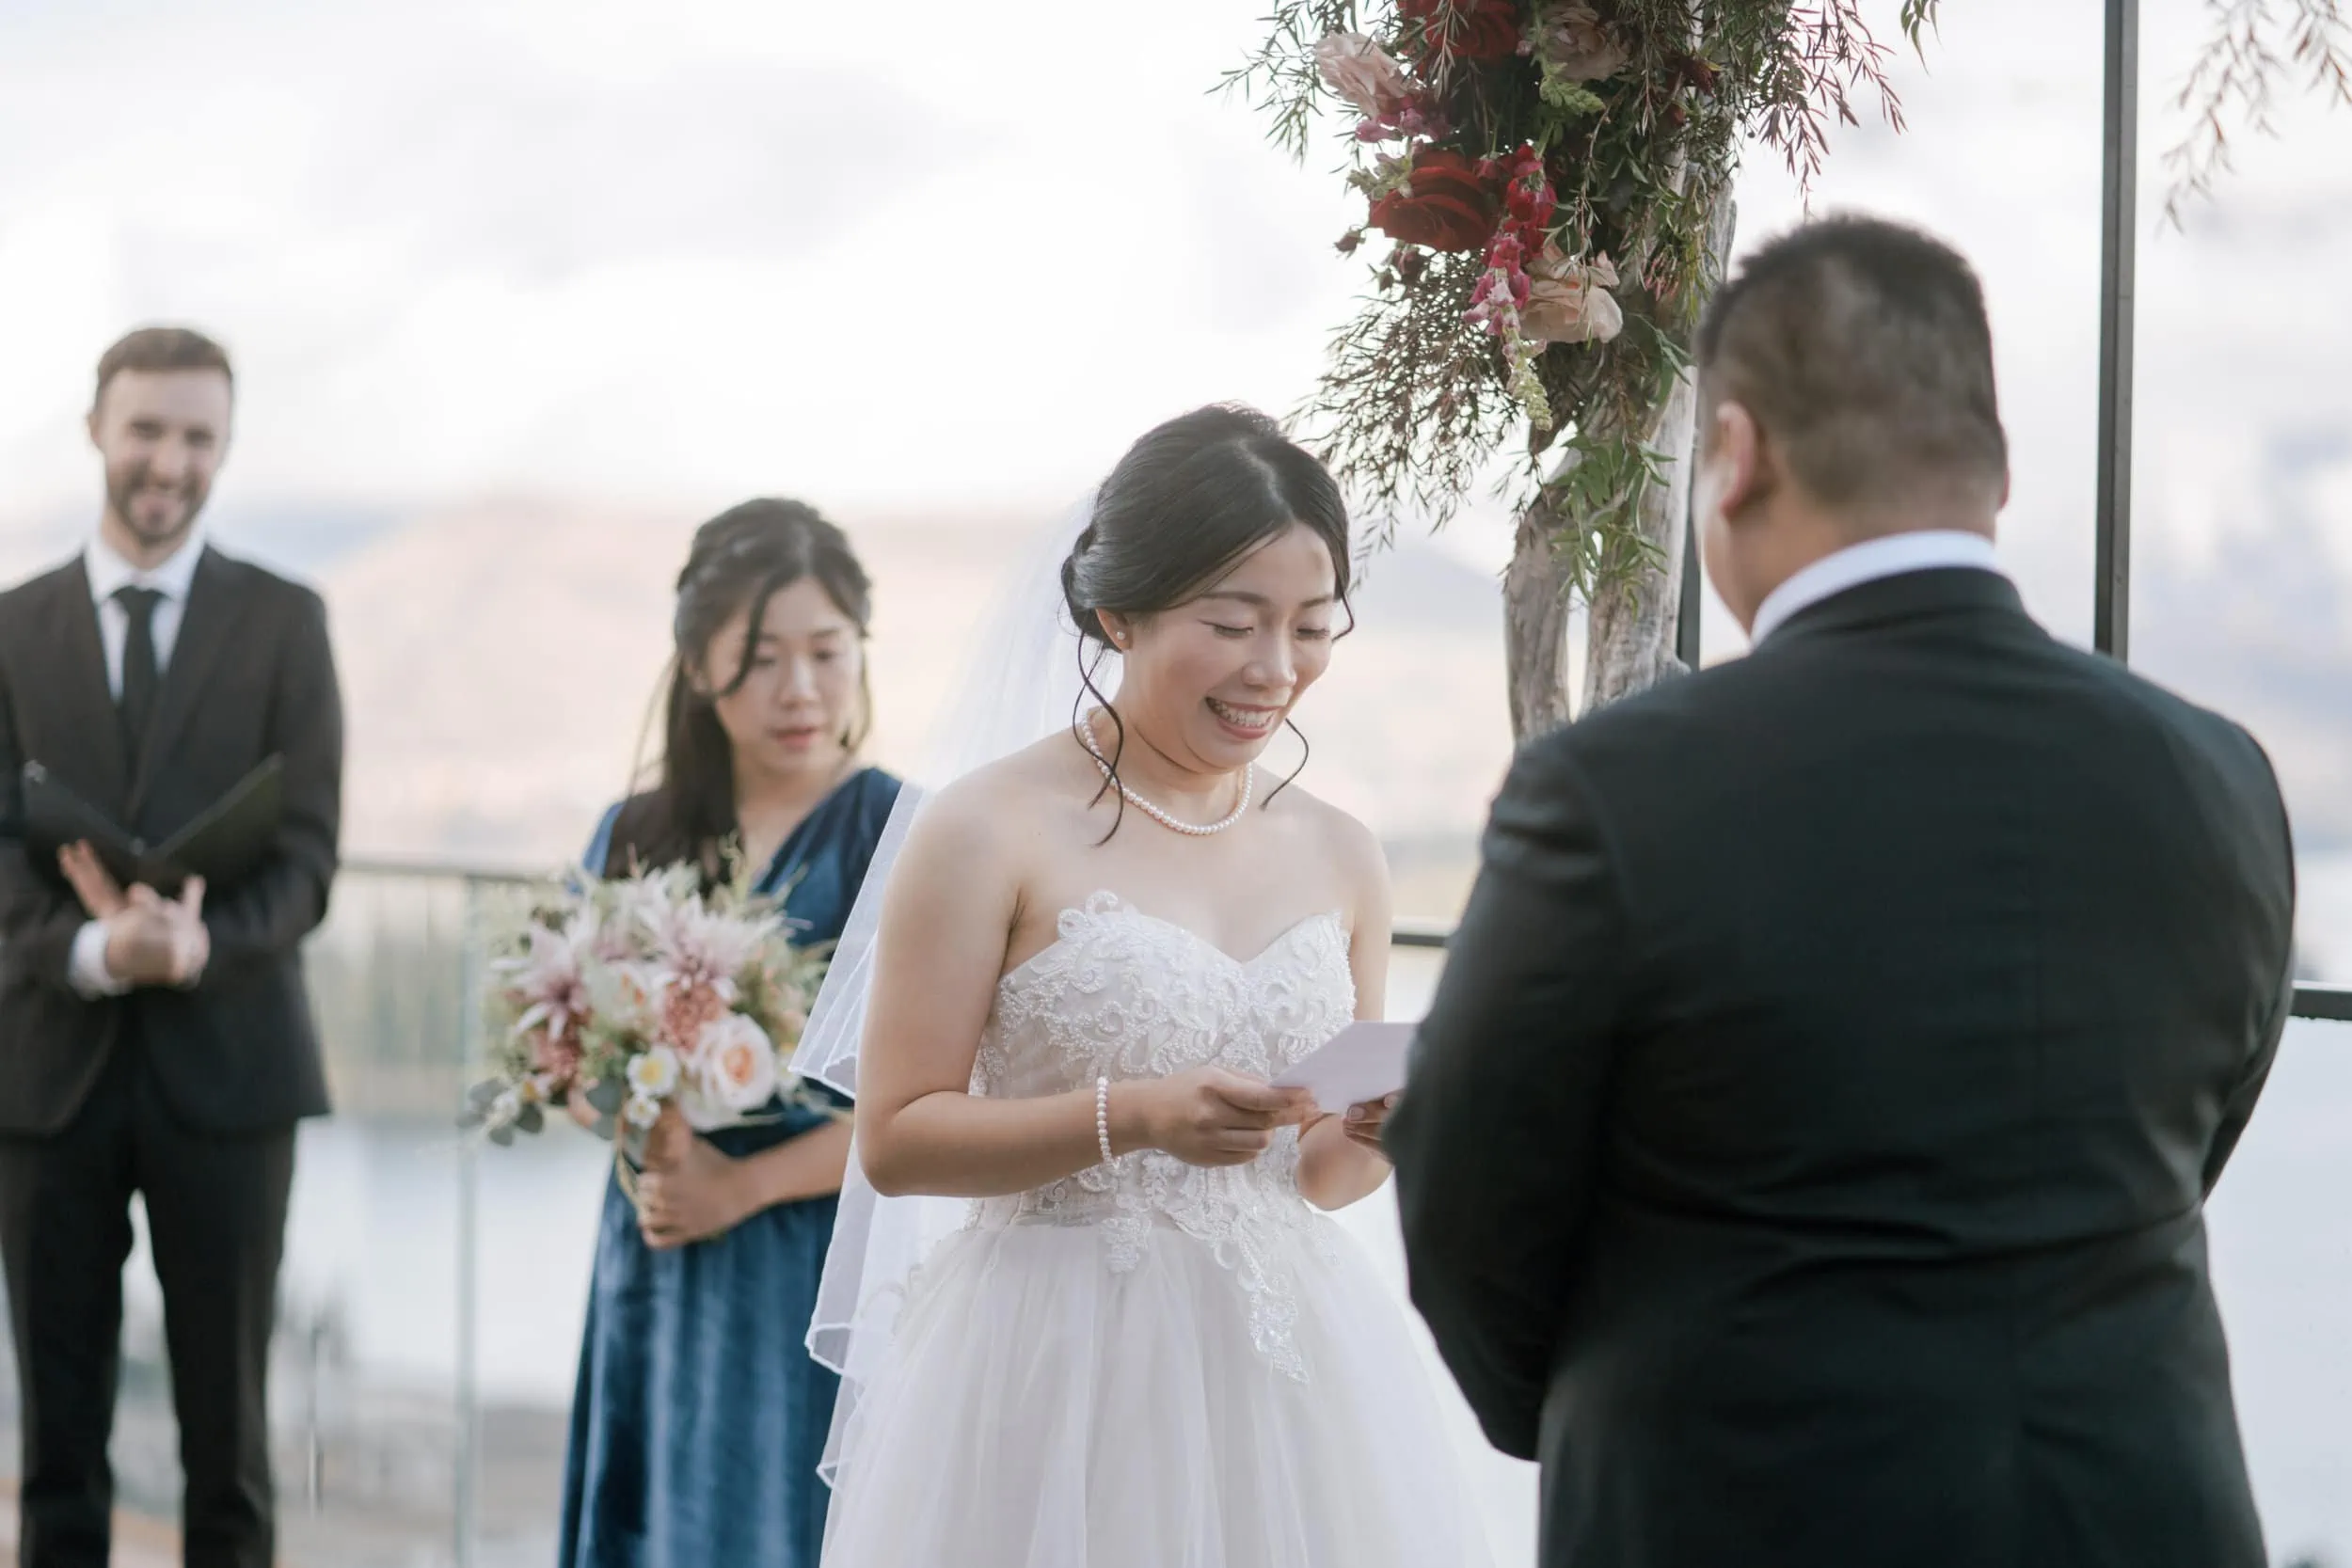 Queenstown New Zealand Elopement Wedding Photographer - Lam and Wendy's wedding ceremony at Kamana Lakehouse.